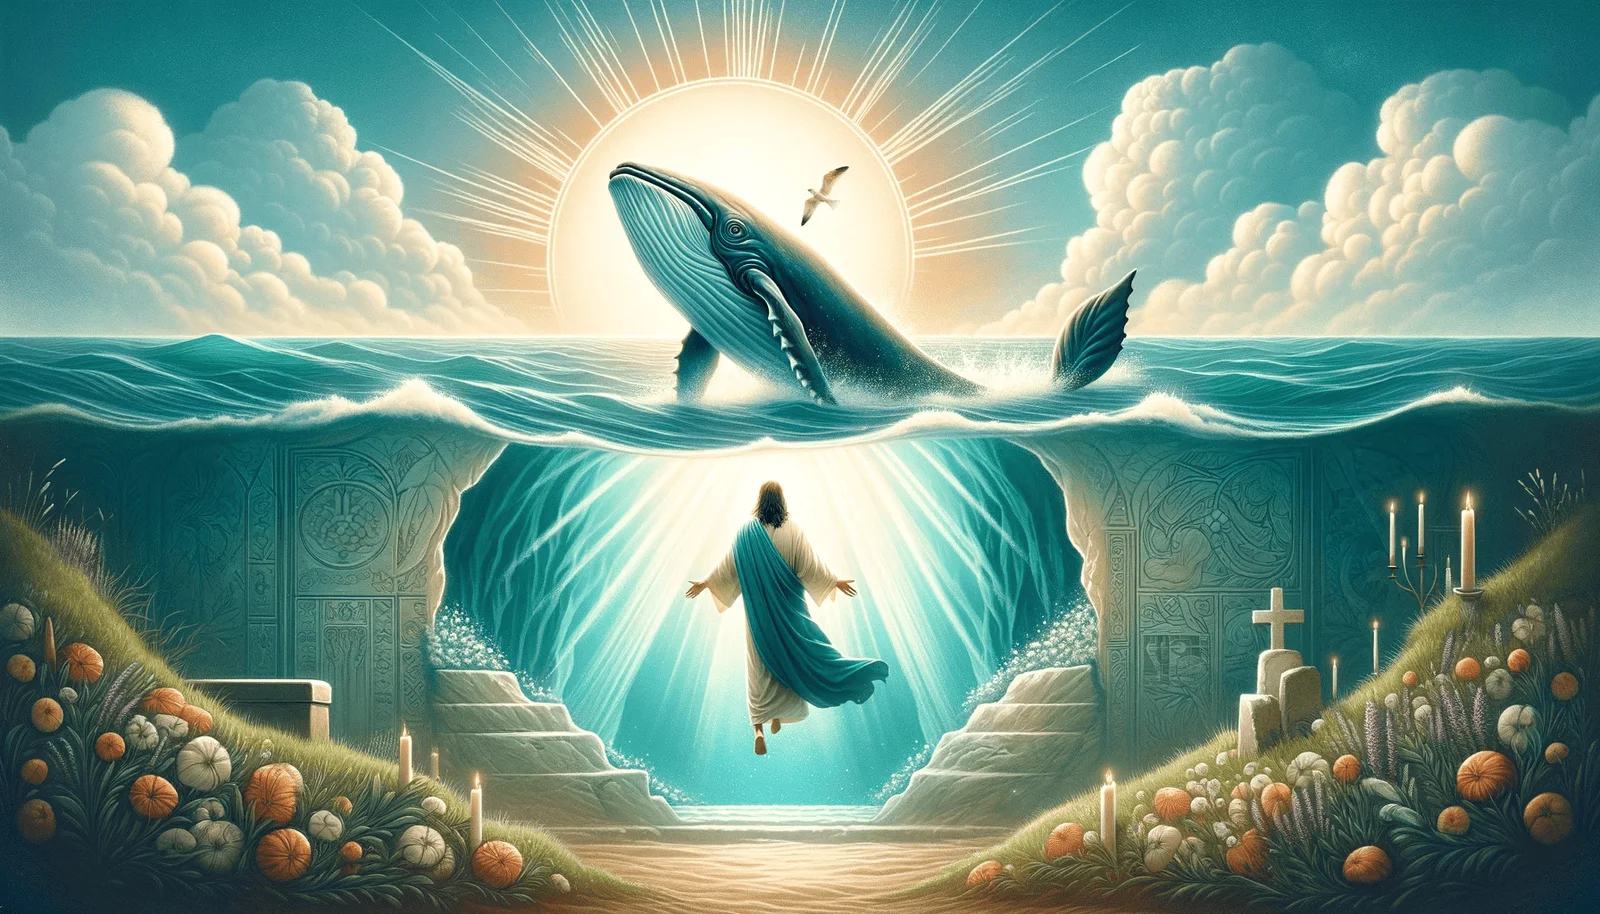 What Is The Sign Of Jonah